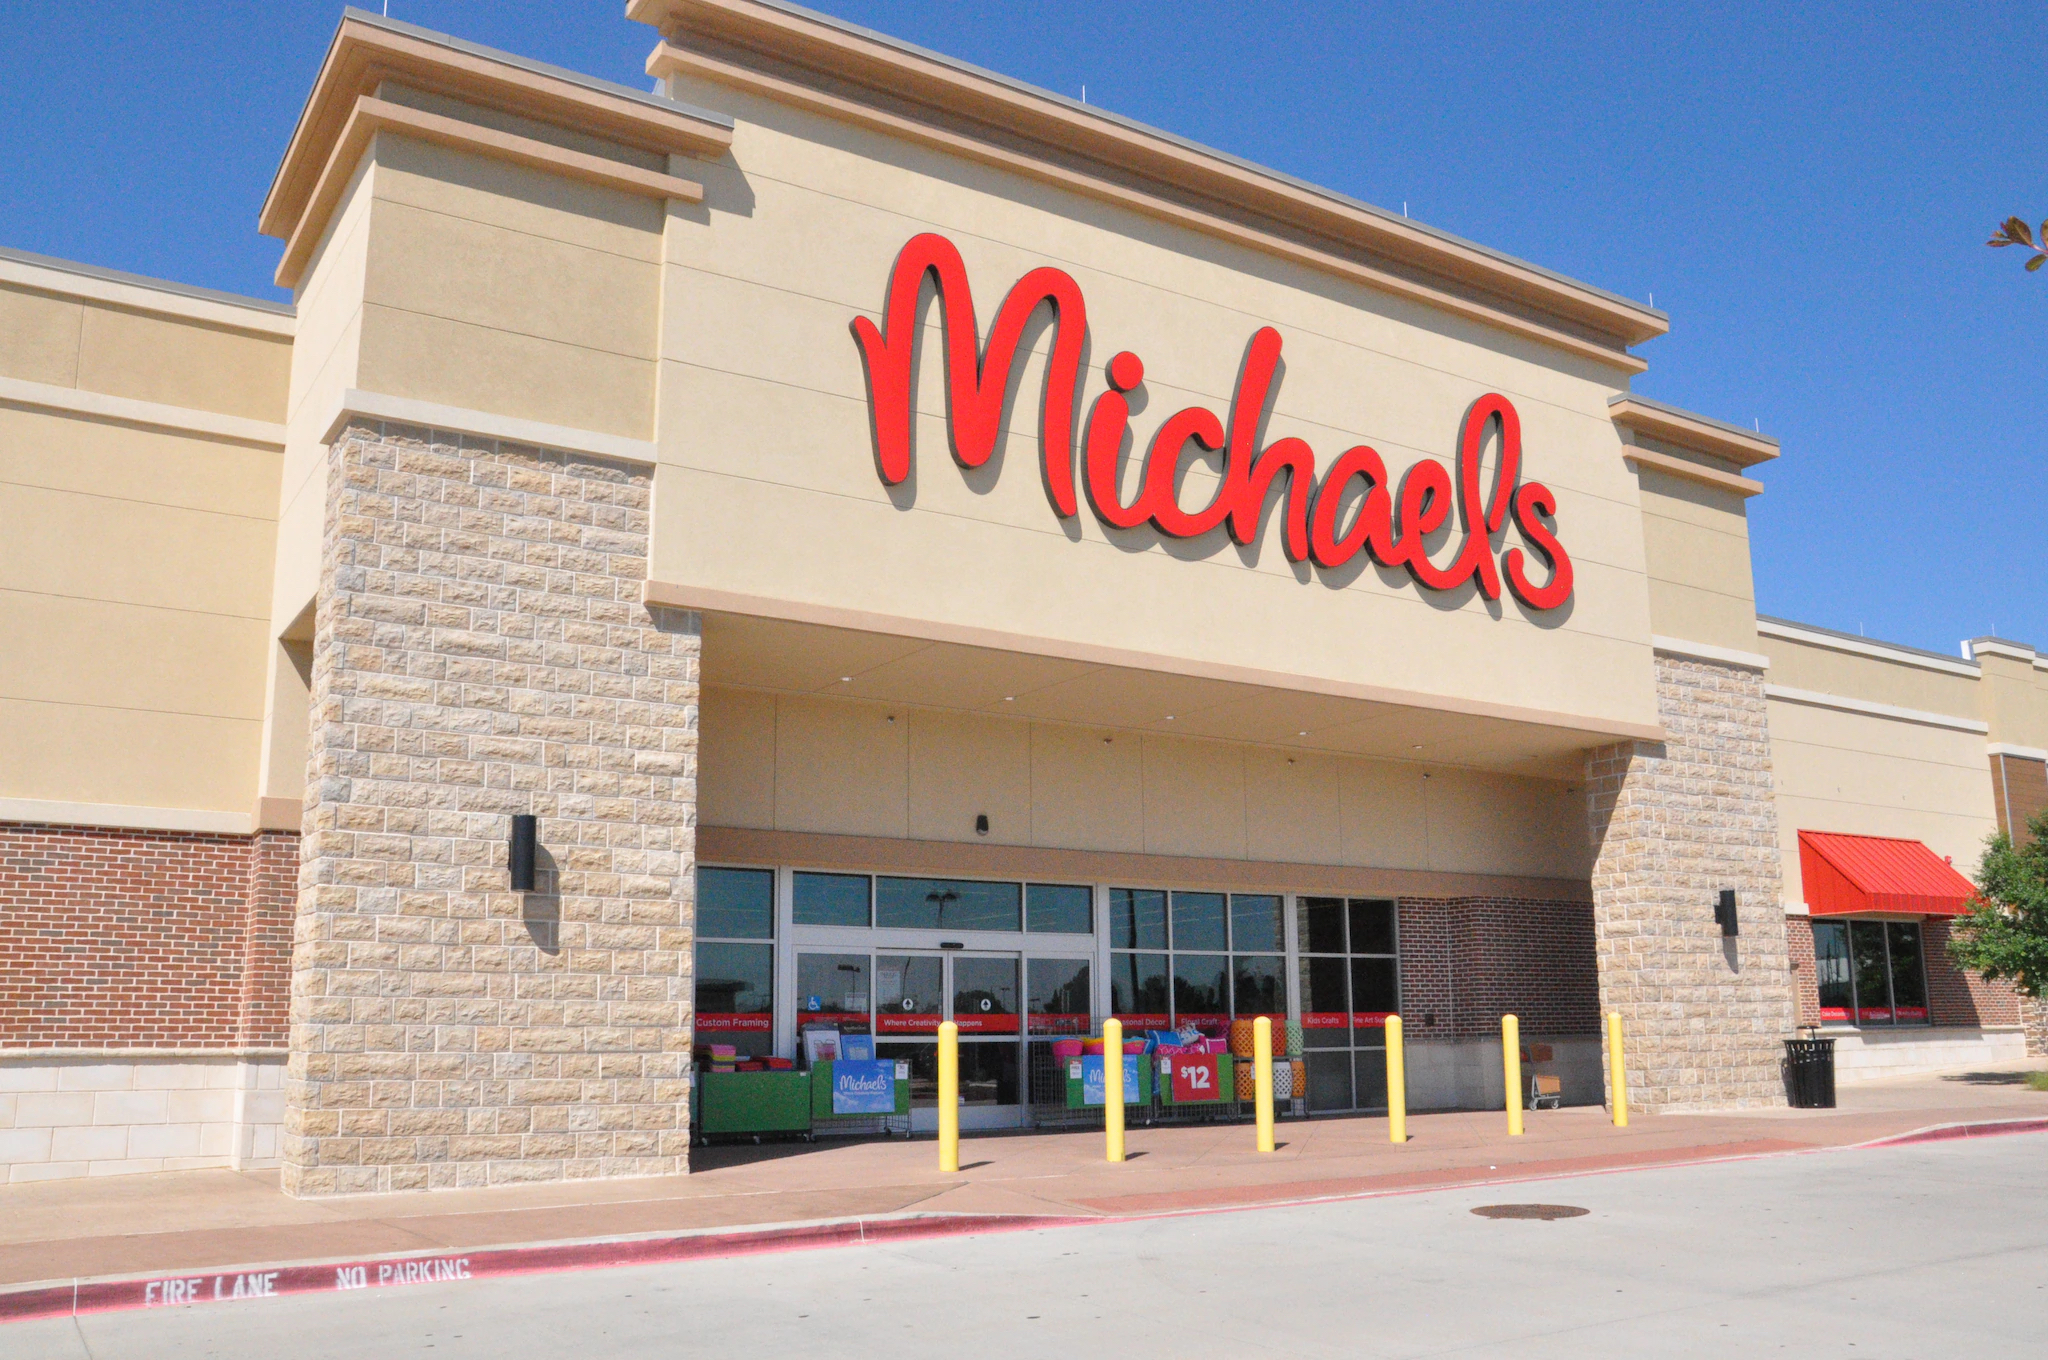 Michaels Plans to Hire 15,000 Employees for the Holiday Season